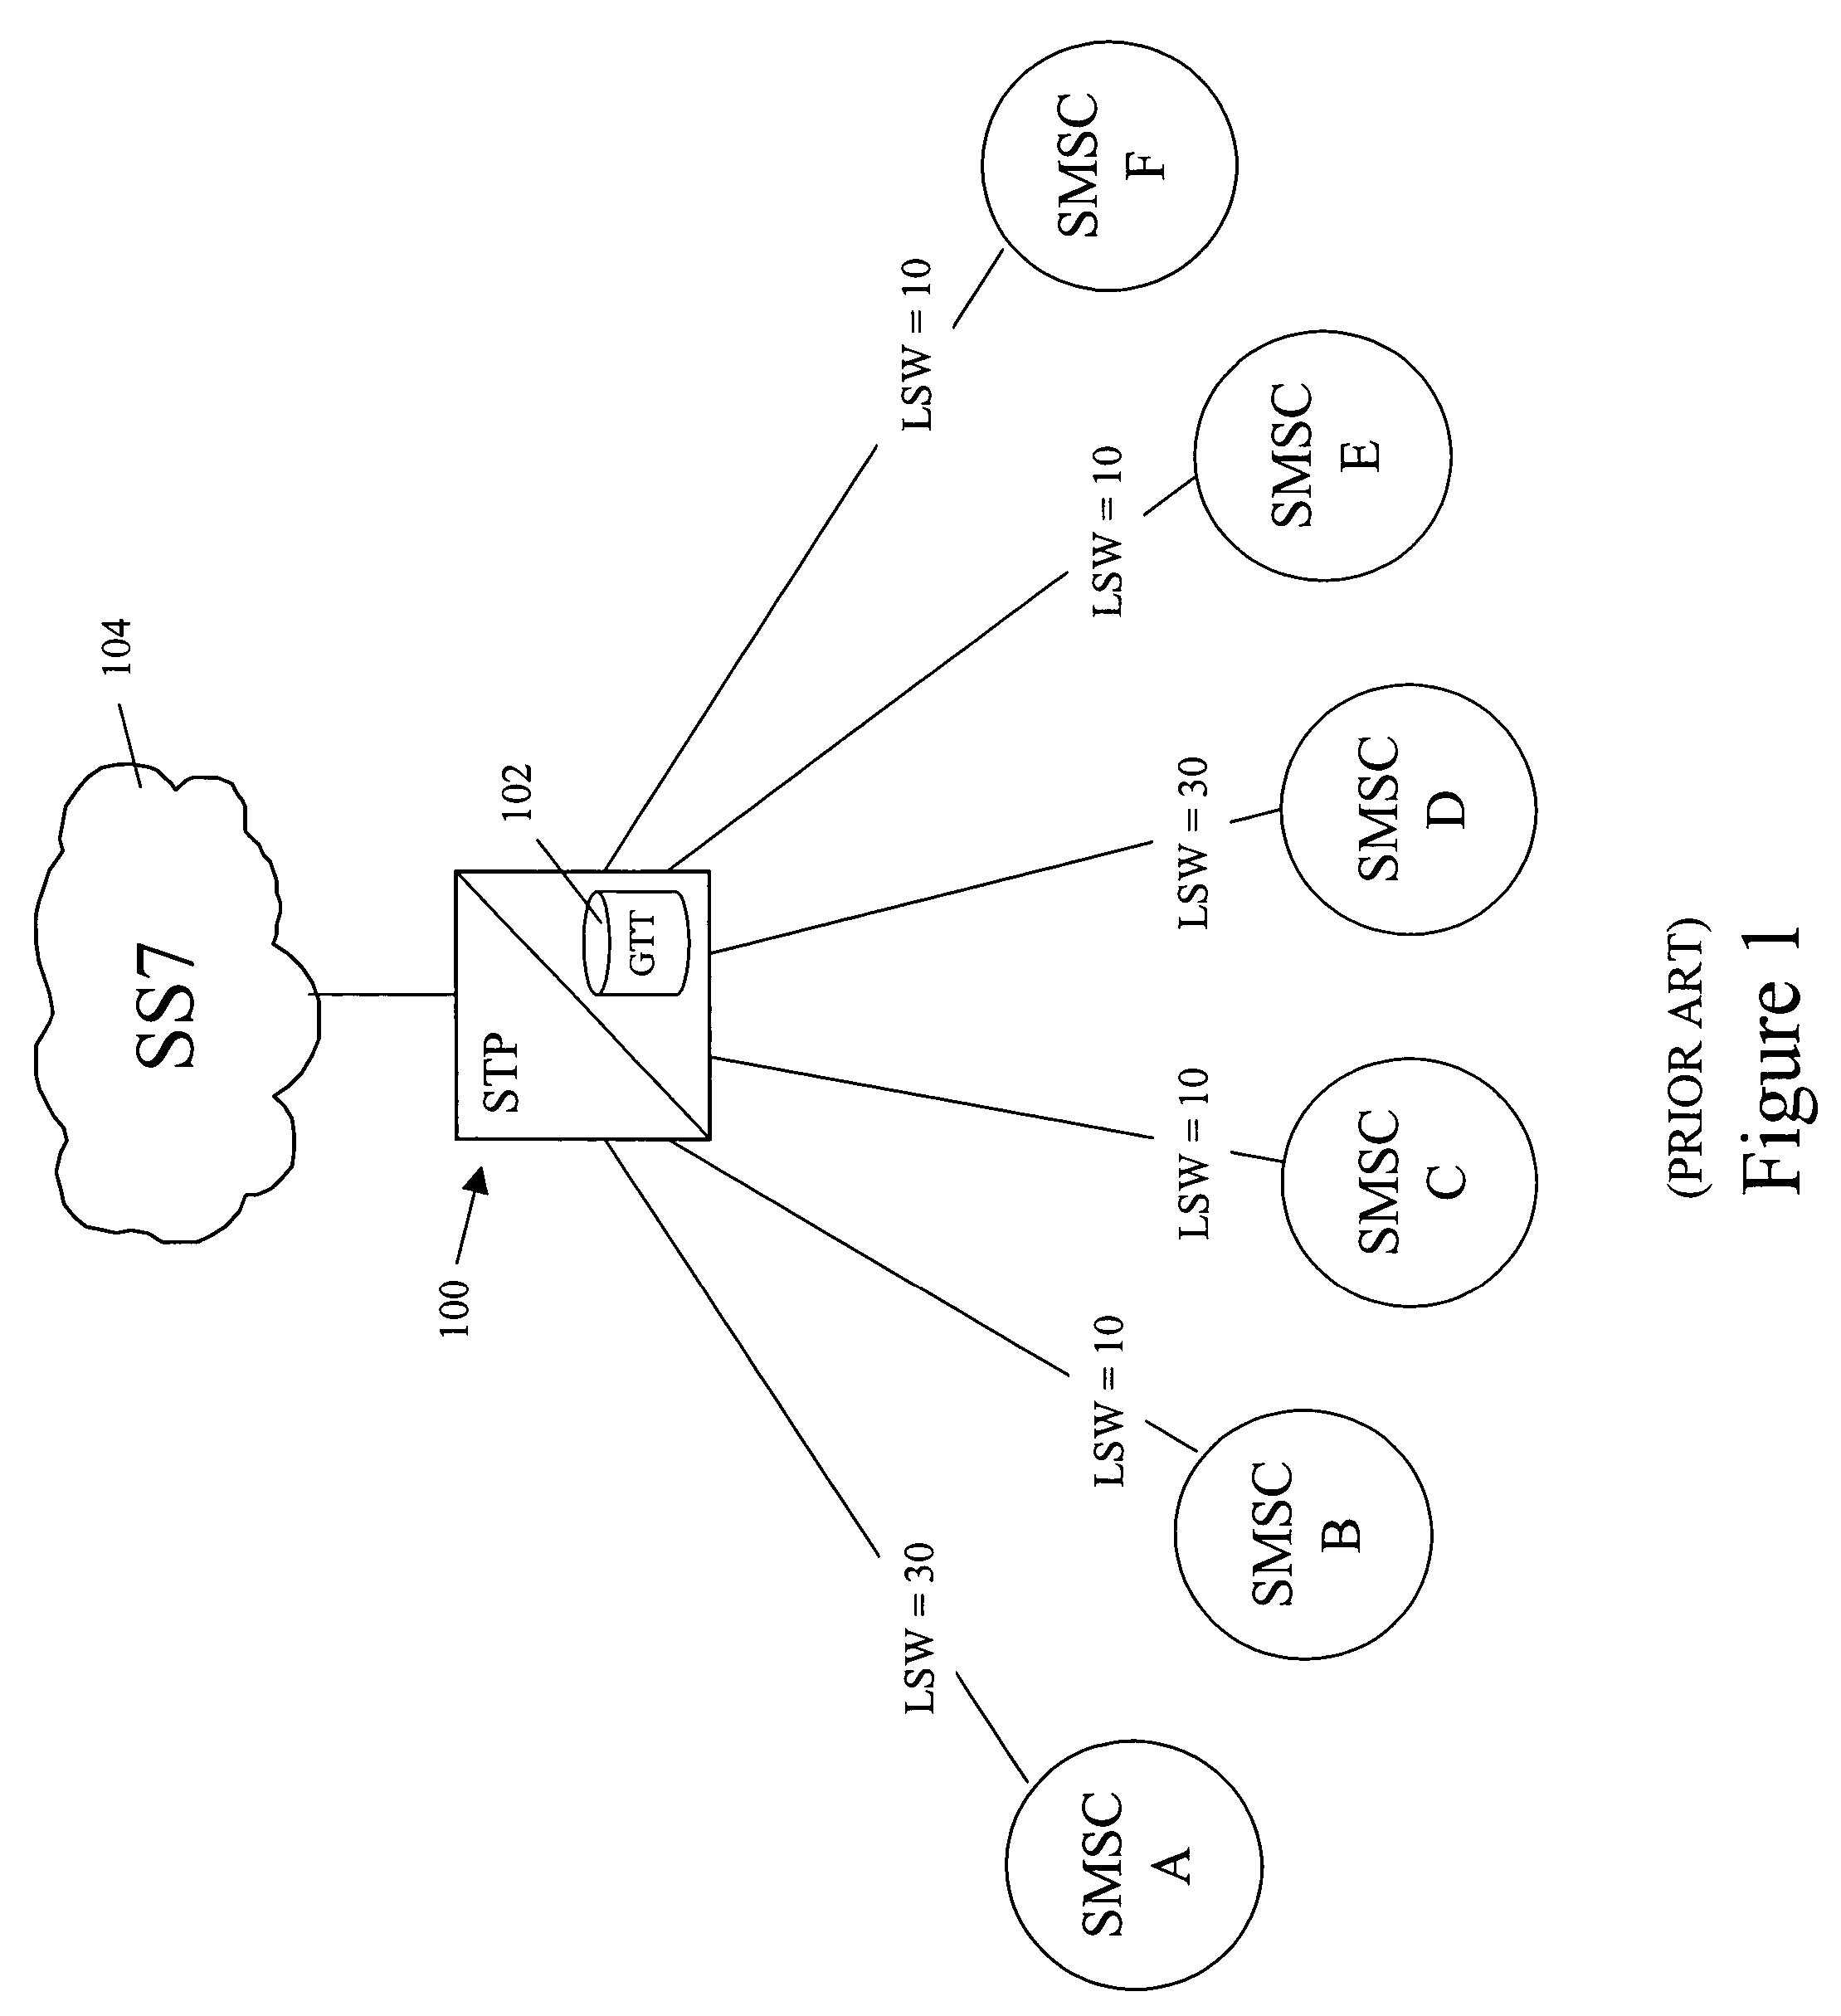 Methods, systems, and computer program products for dynamically adjusting load sharing distributions in response to changes in network conditions